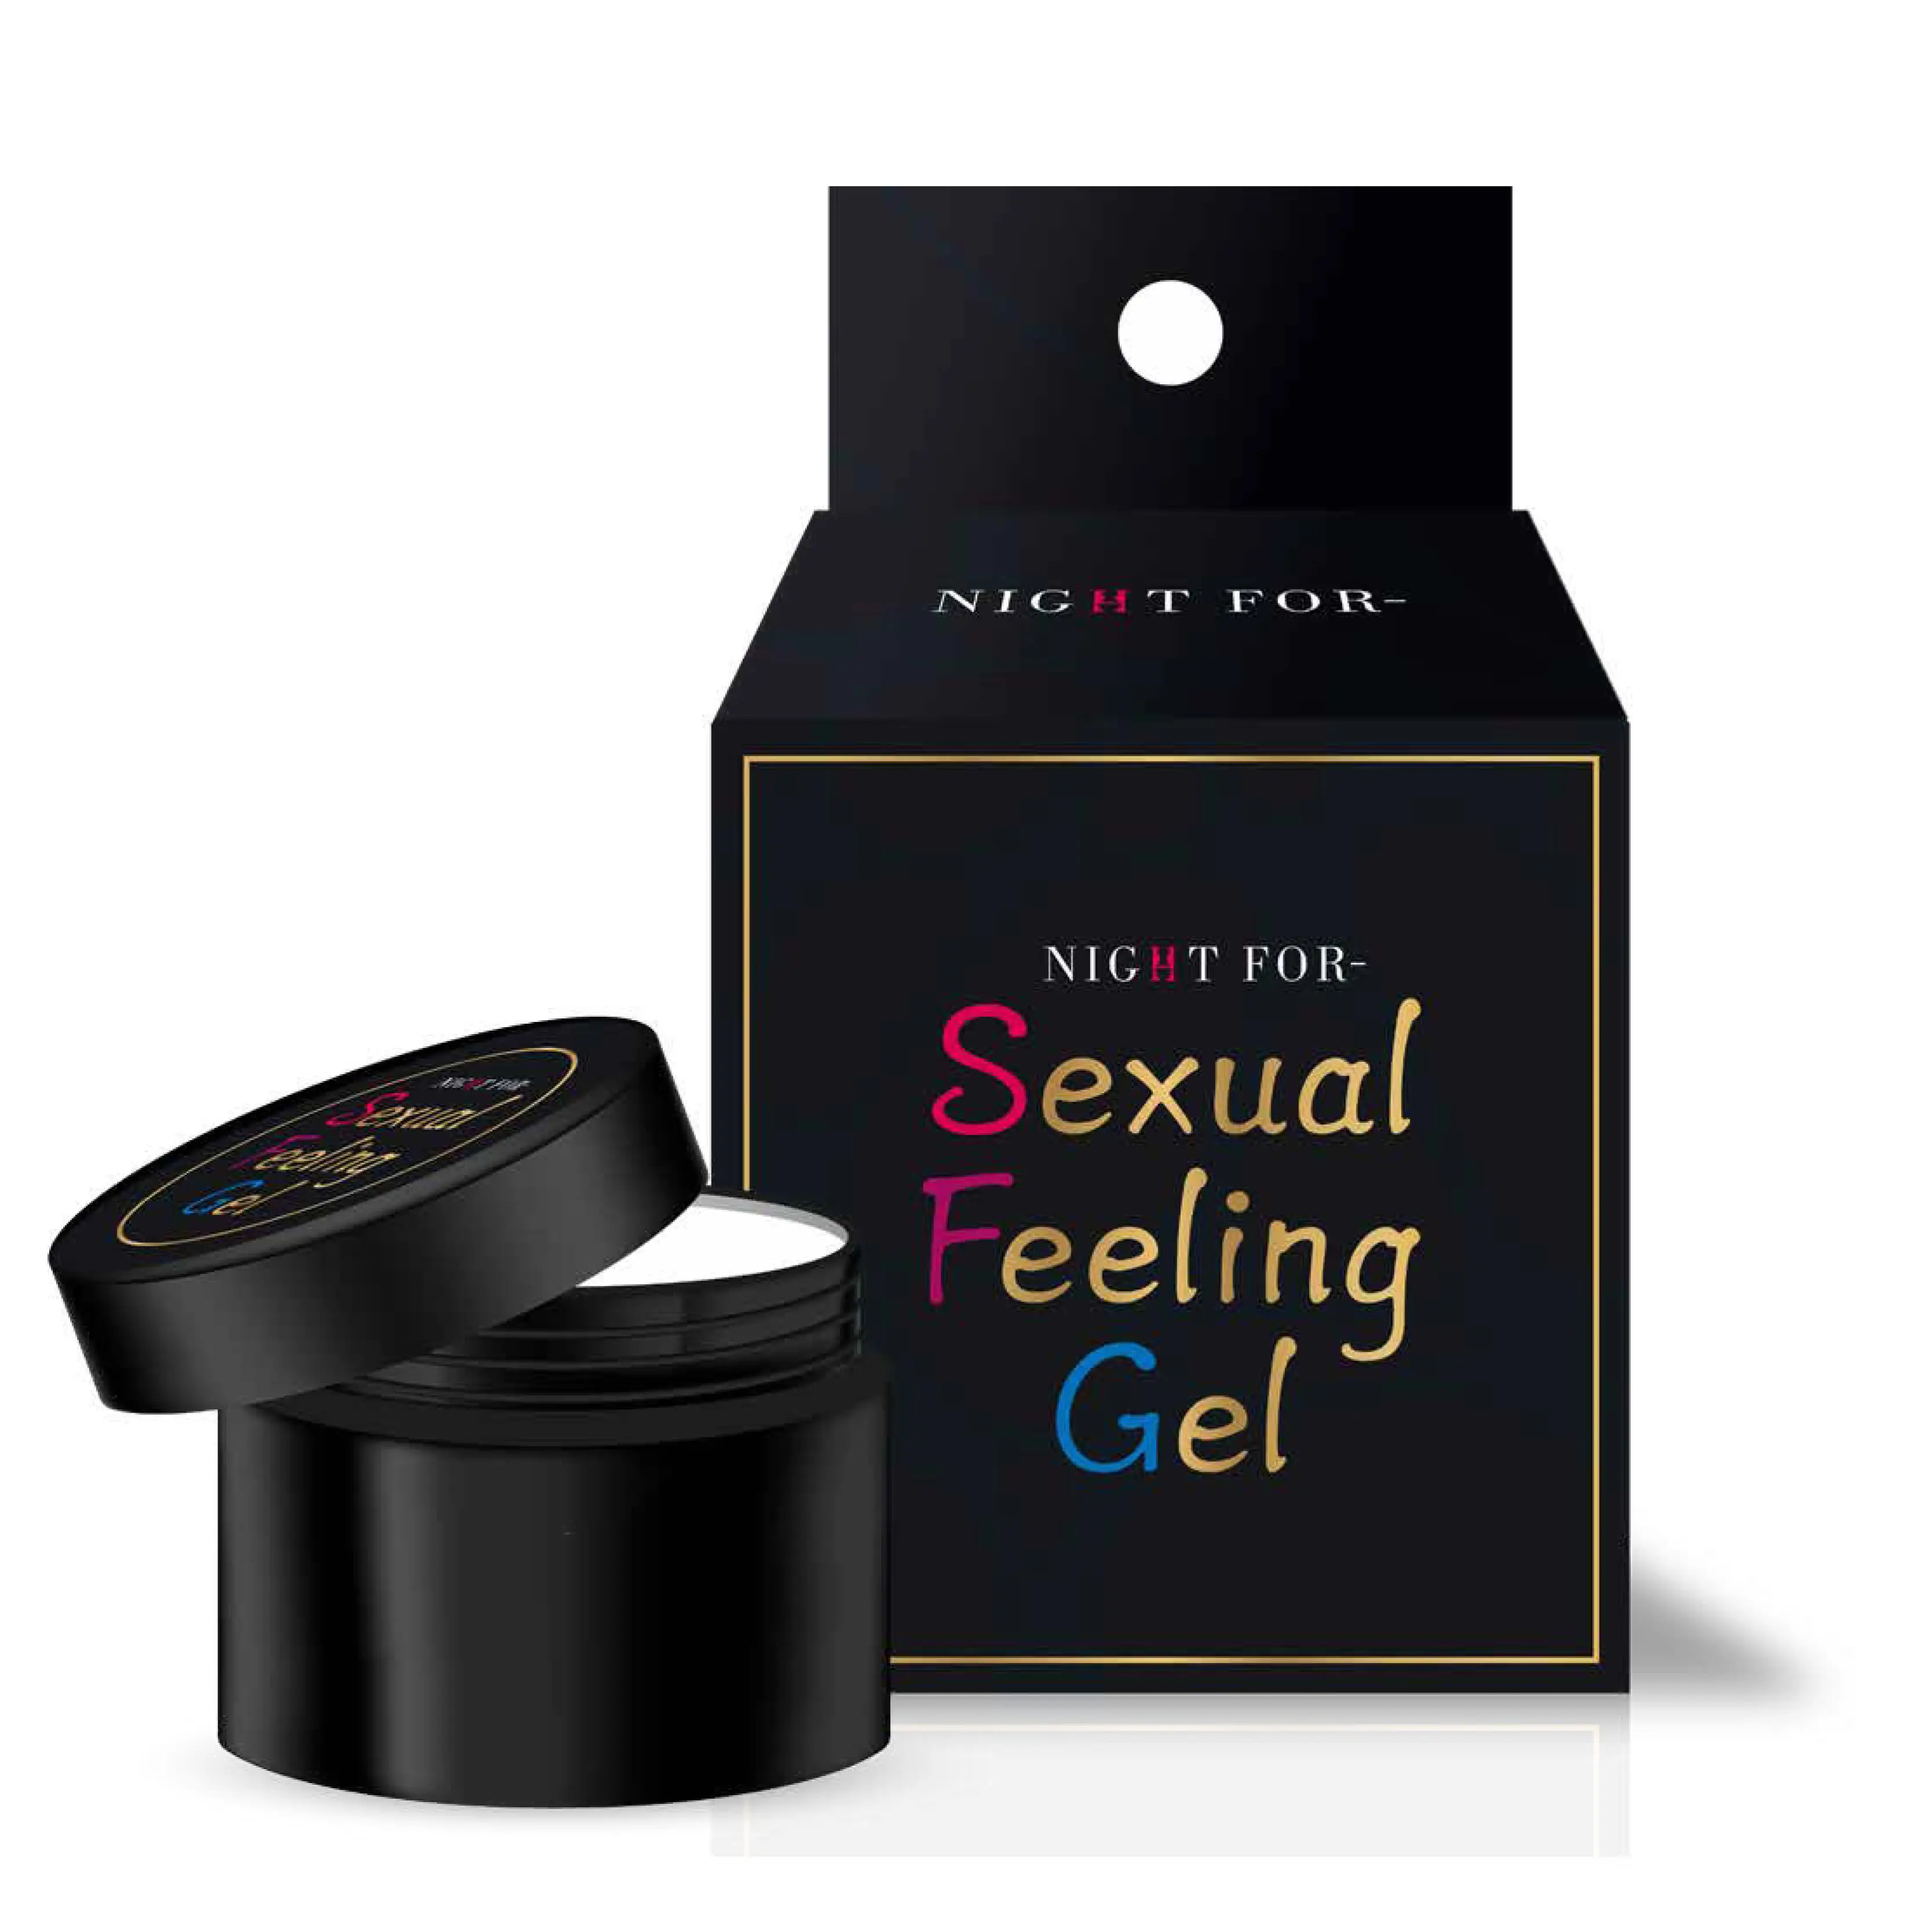 NIGHT LIFE FOR - sexual feeling gel for women improve sexual desire sexual pleasure vaginal massage gel made in Japan